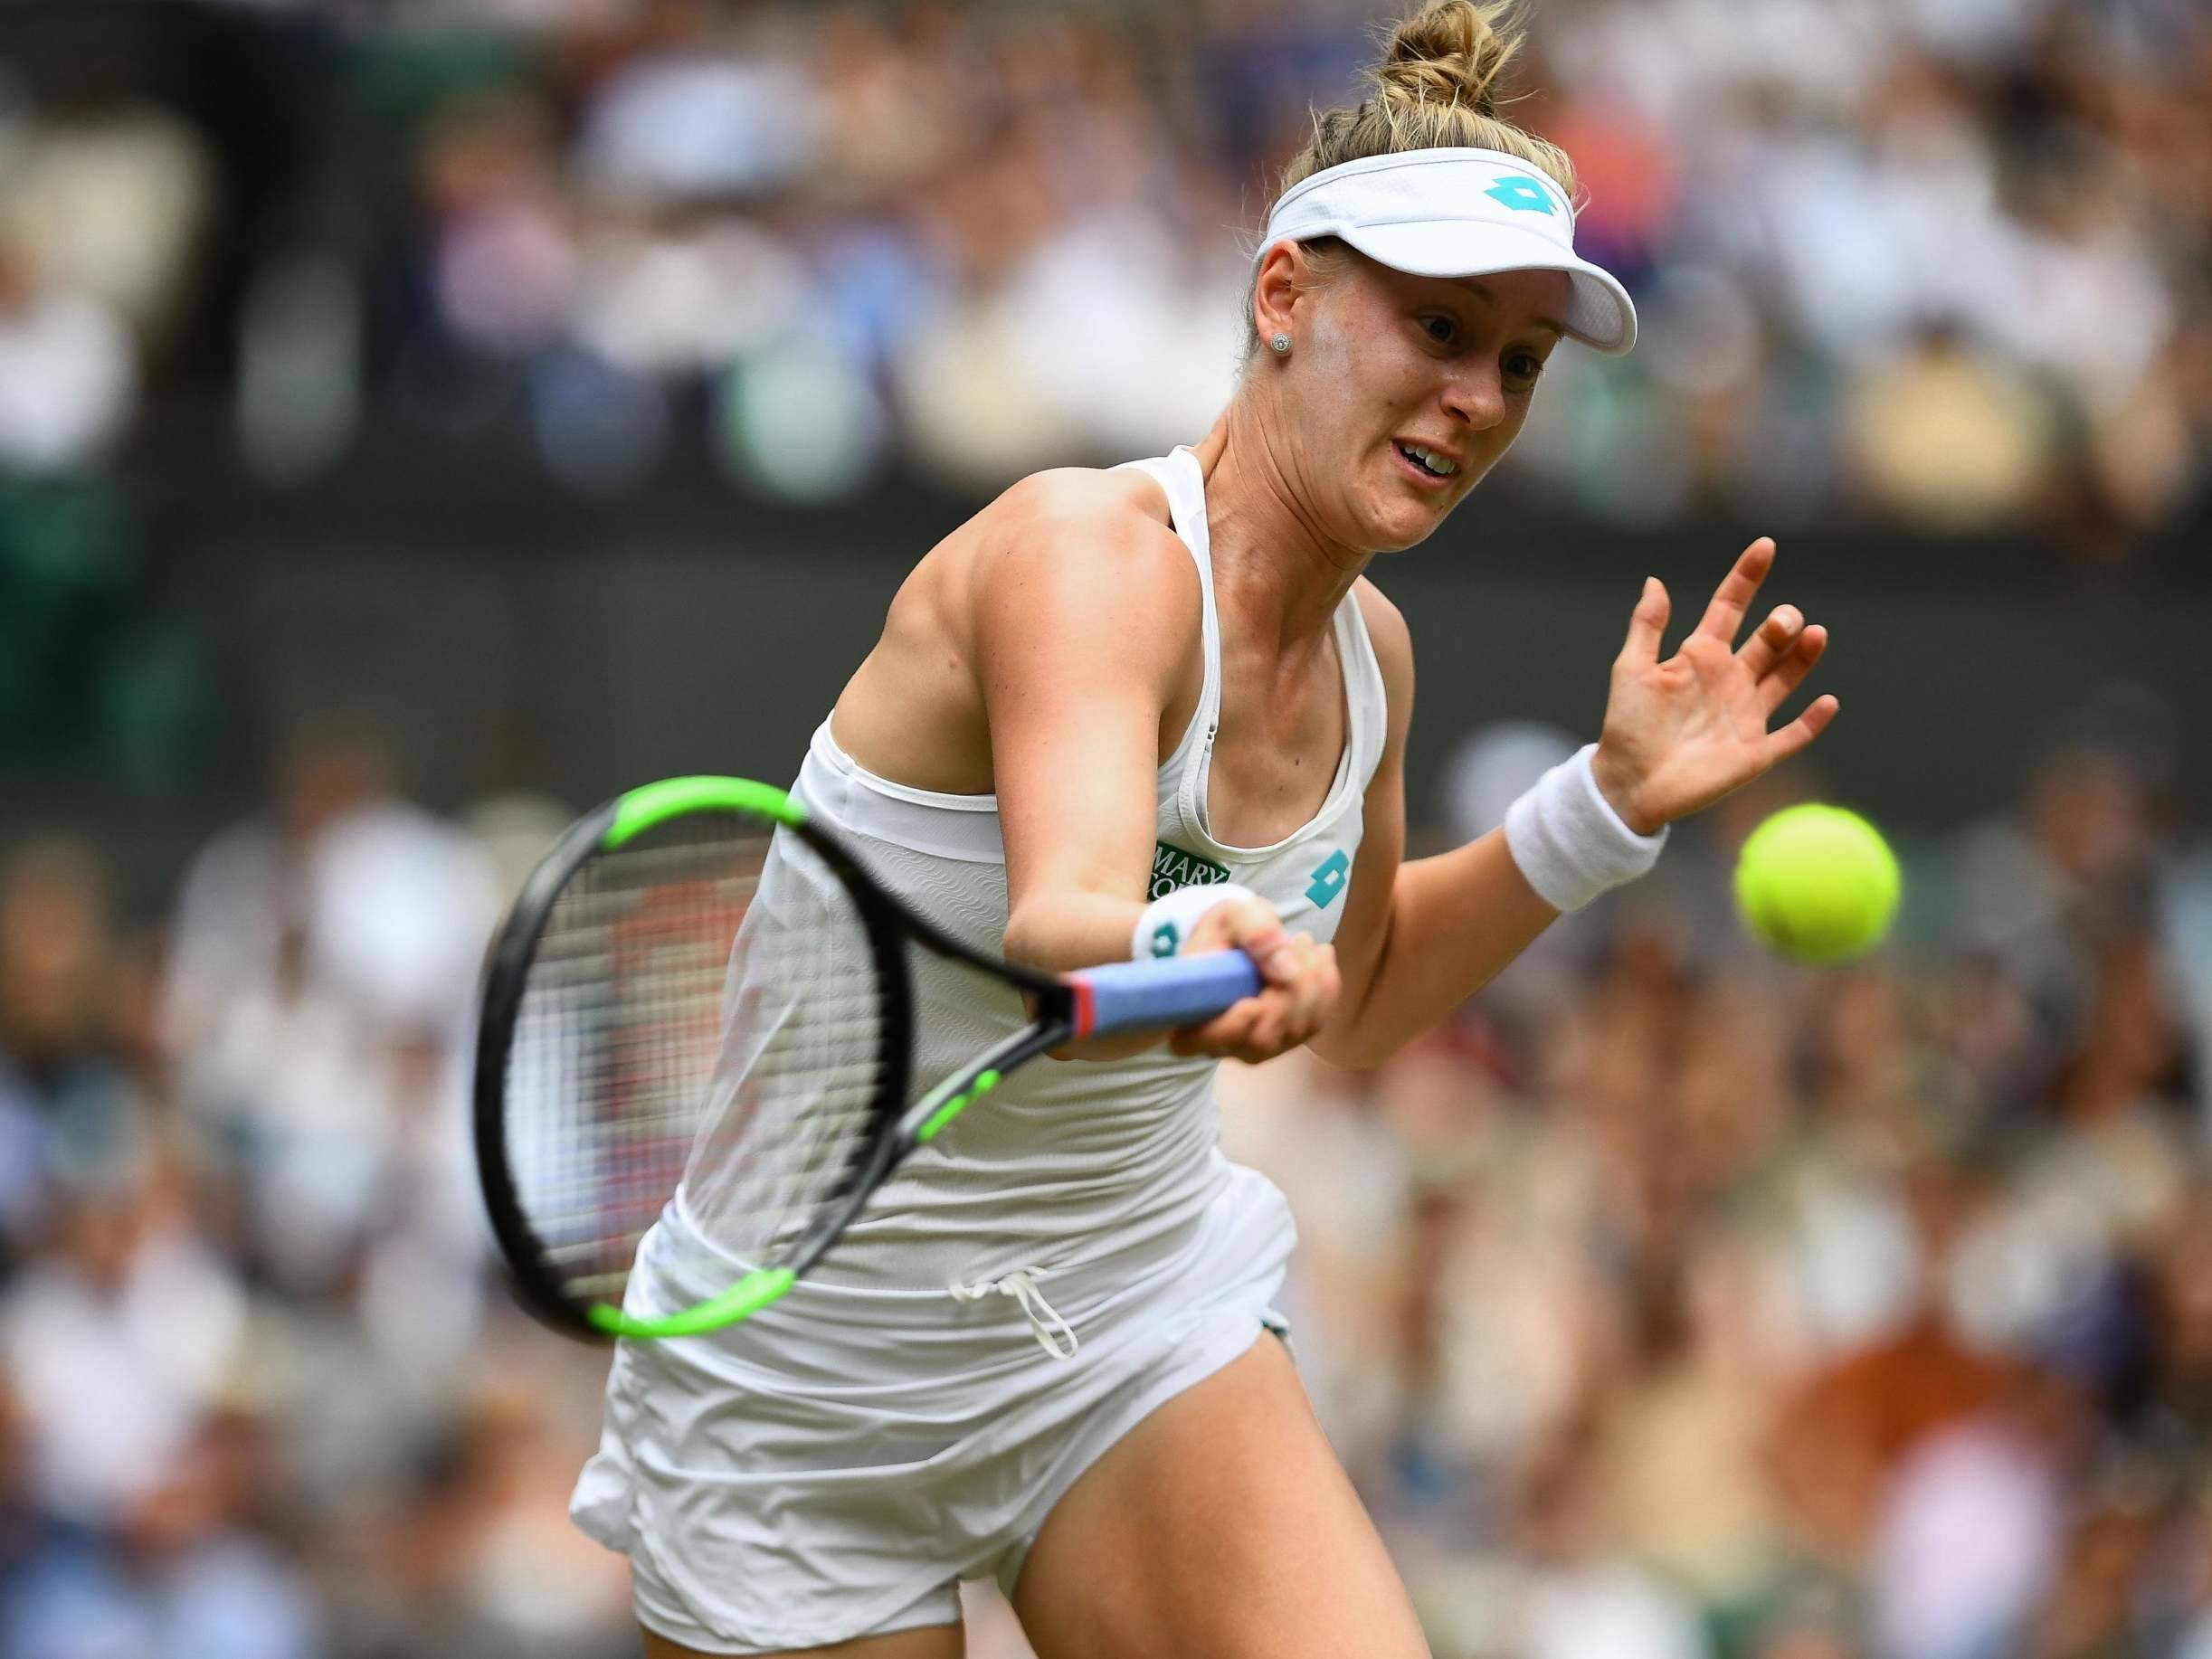 Riske used an aggressive strategy early against Williams